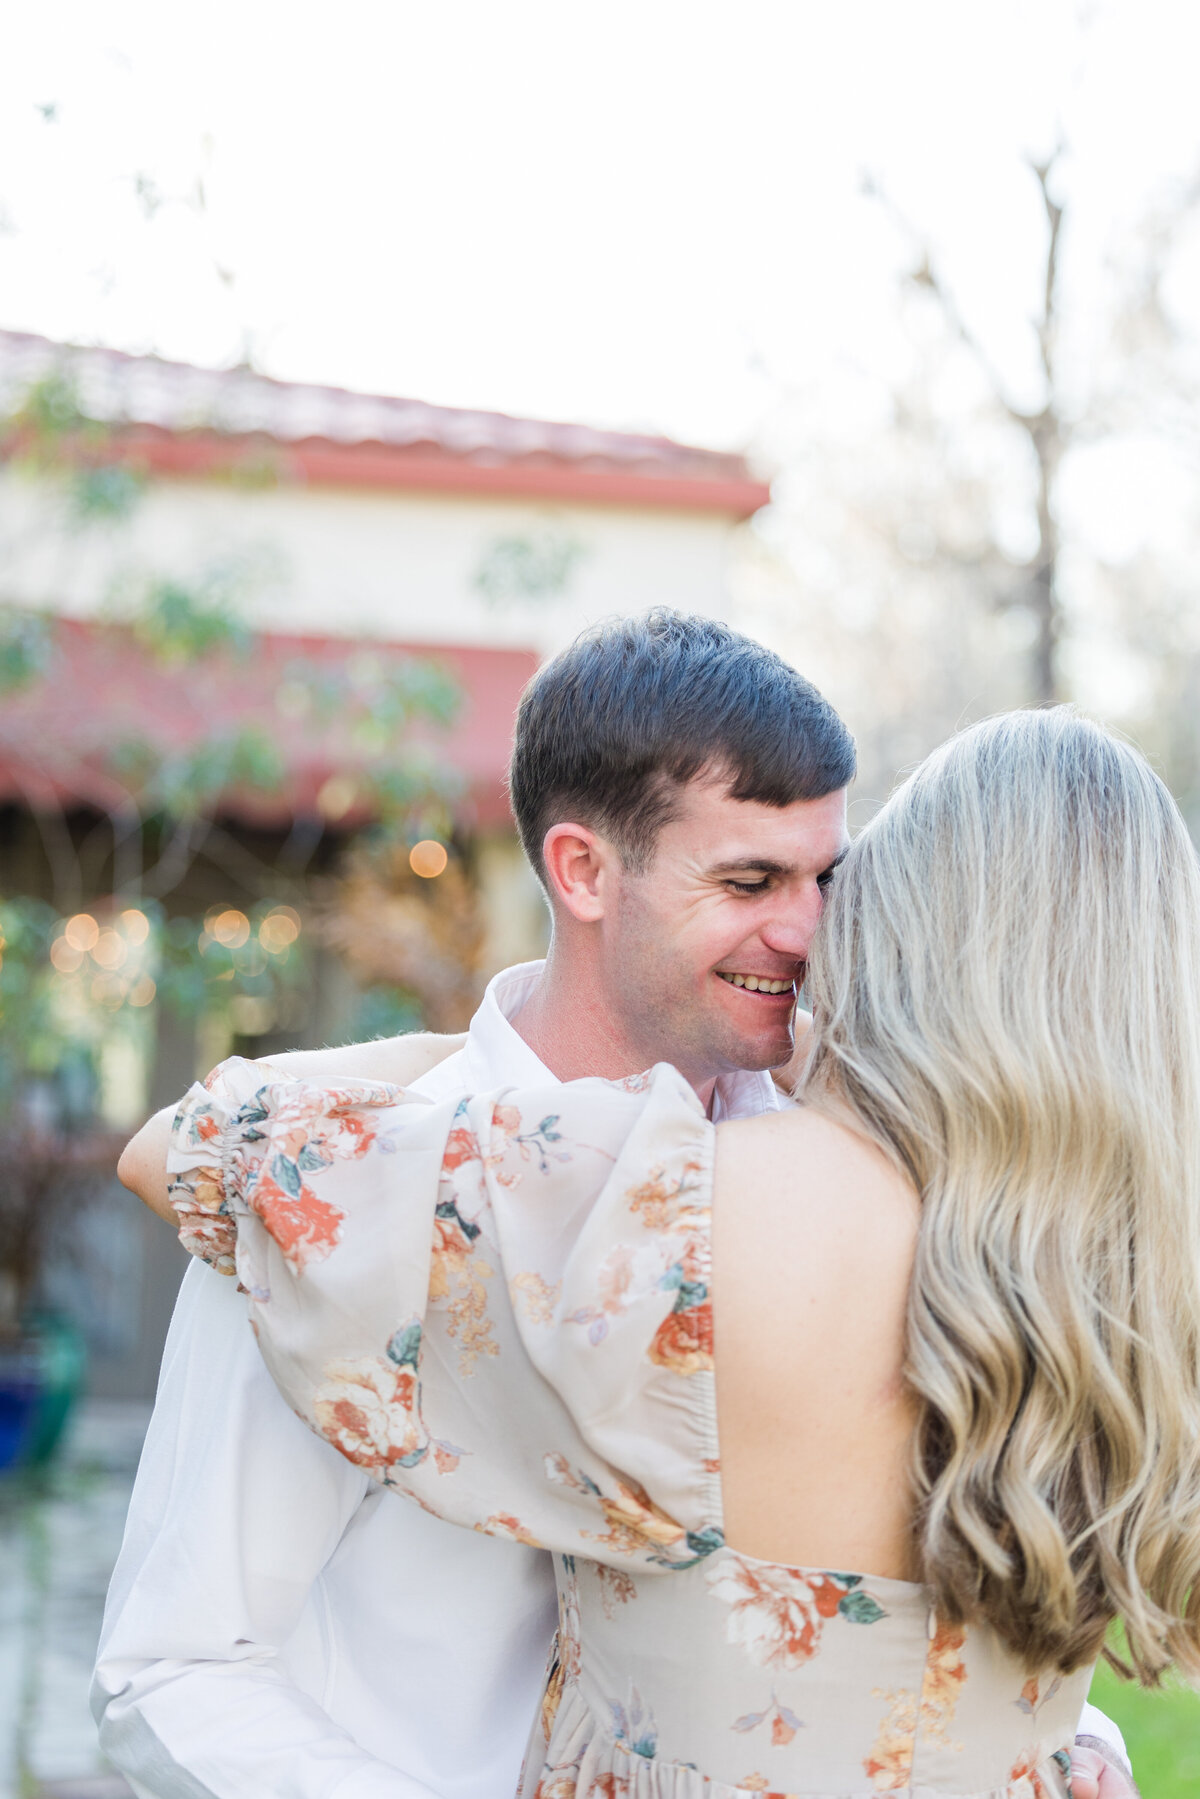 Mary Warren Engagement Session - Taylor'd Southern Events - Florida Wedding Photographer-5841